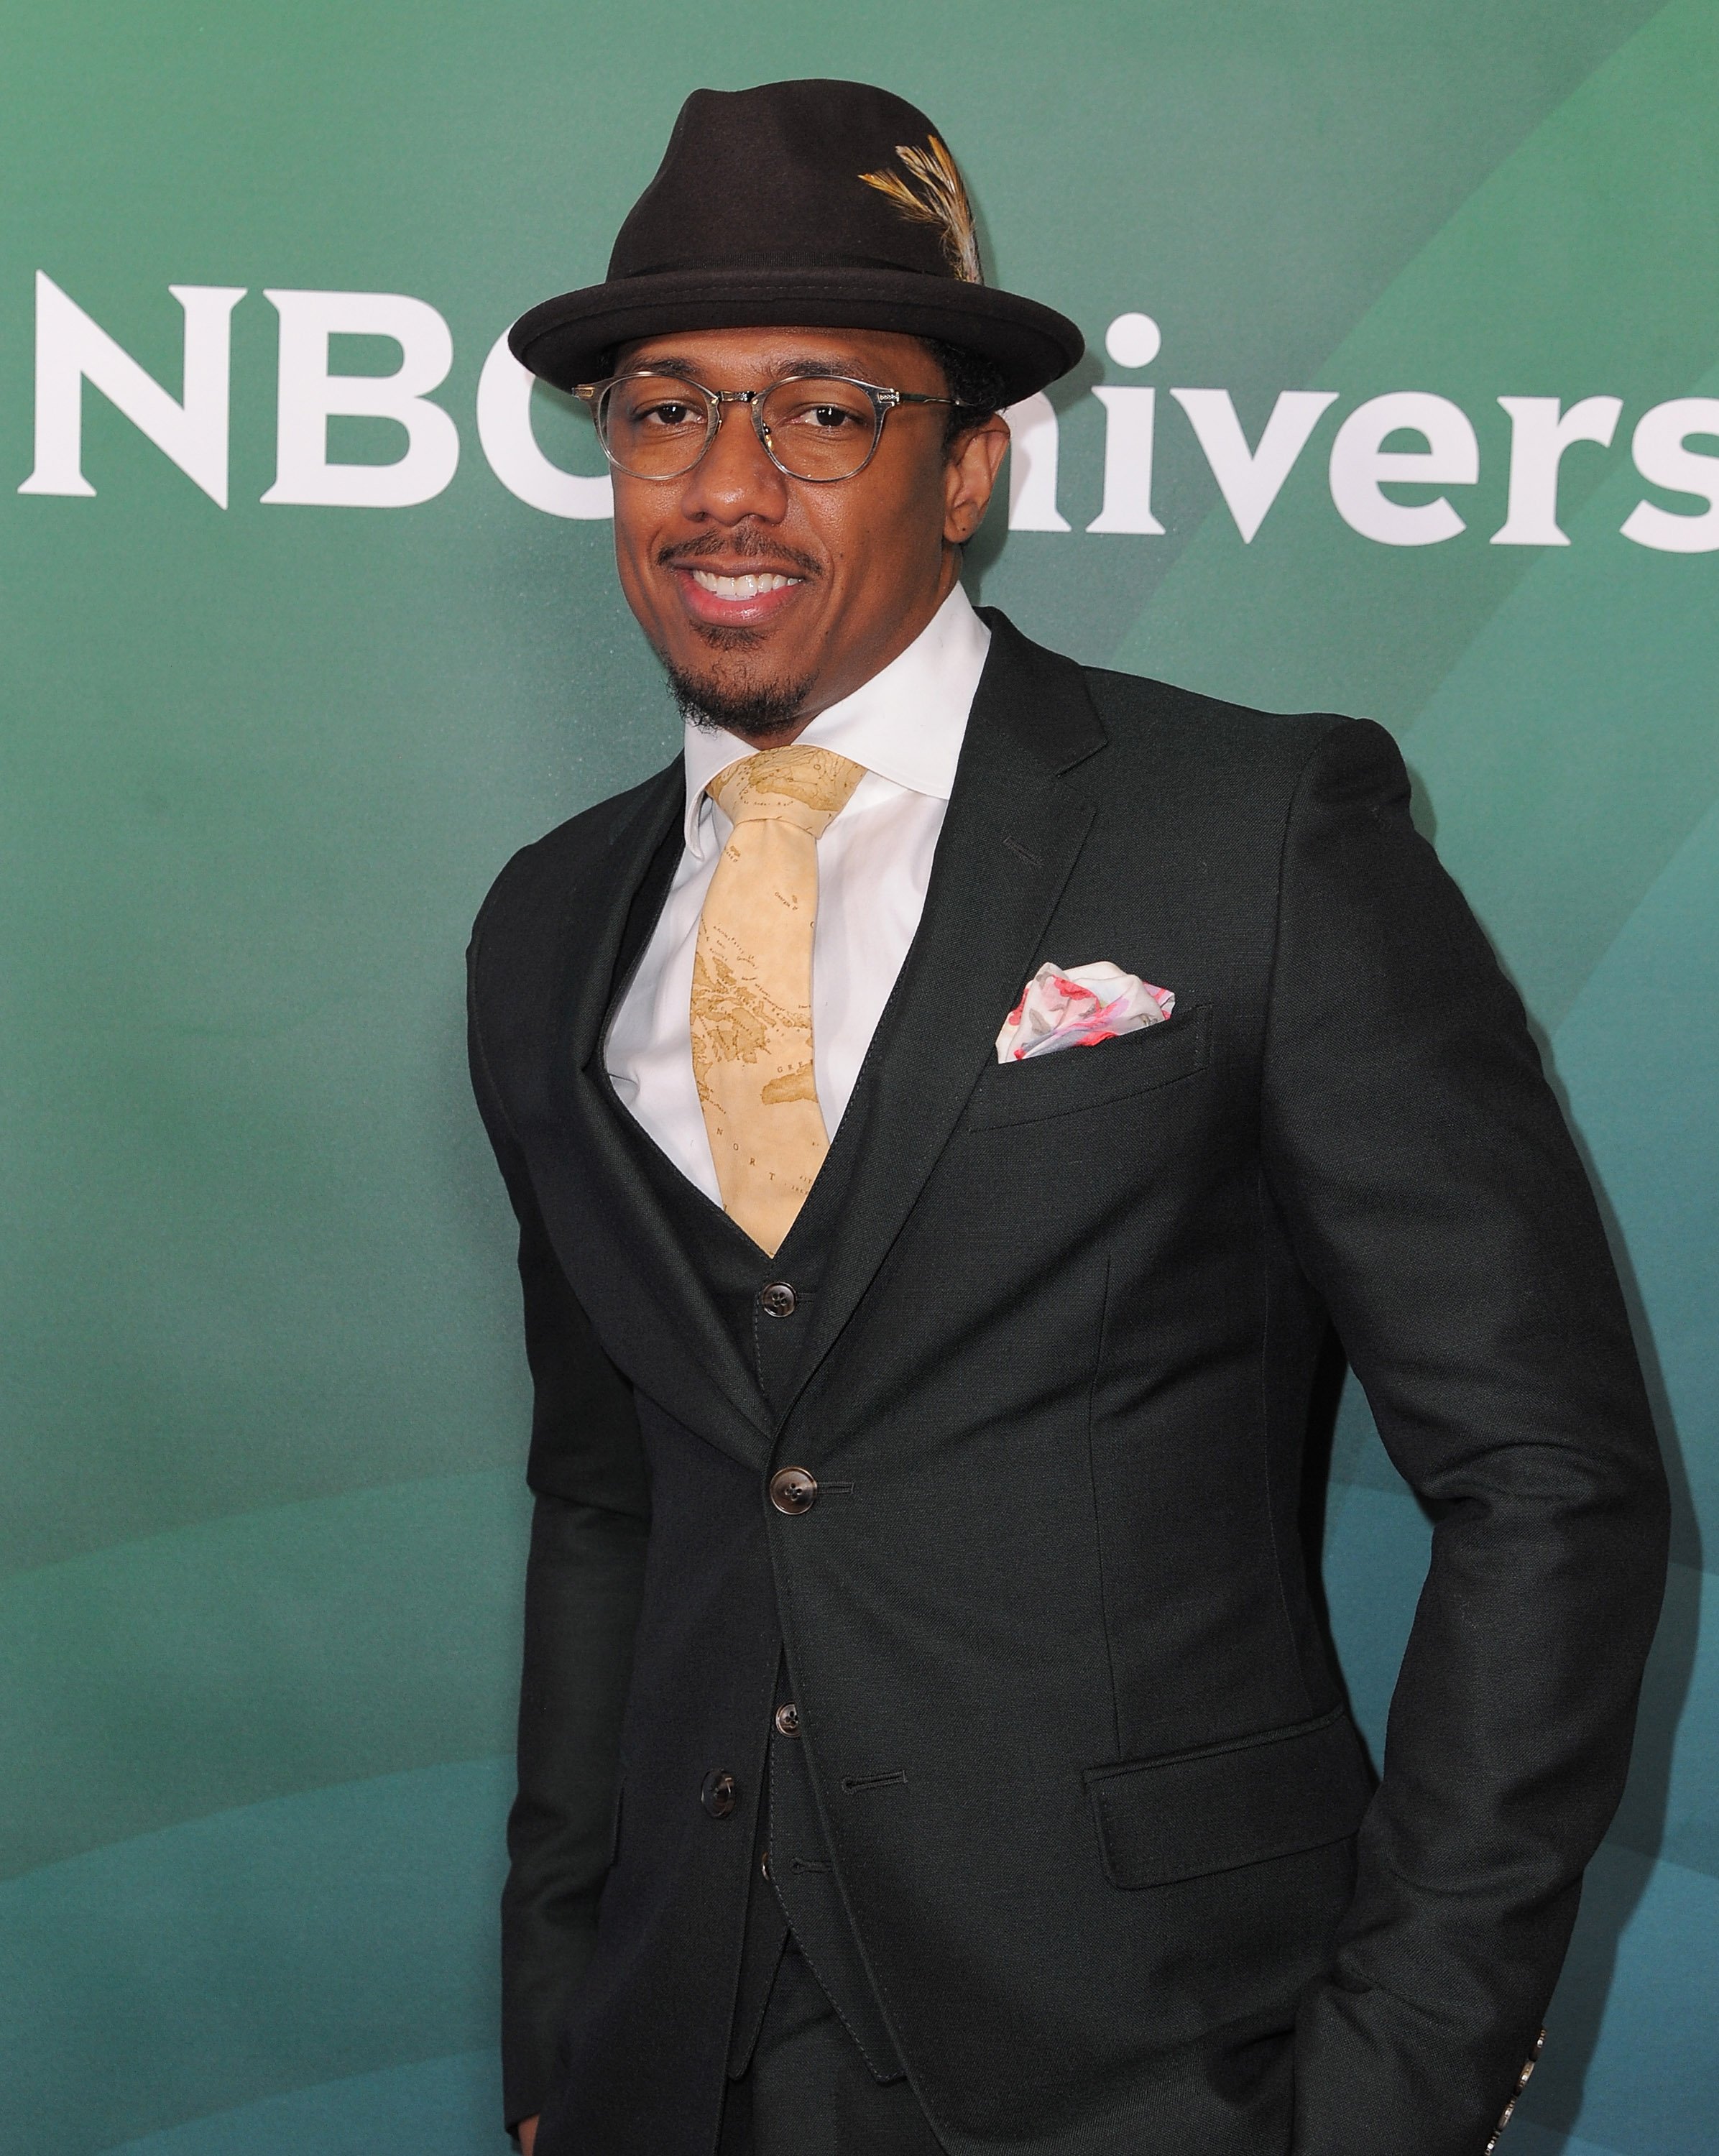 Nick Cannon arrives at the 2016 Winter TCA Tour - NBCUniversal Press Tour Day 2 at Langham Hotel on January 14, 2016 in Pasadena, California. | Photo: Getty Images